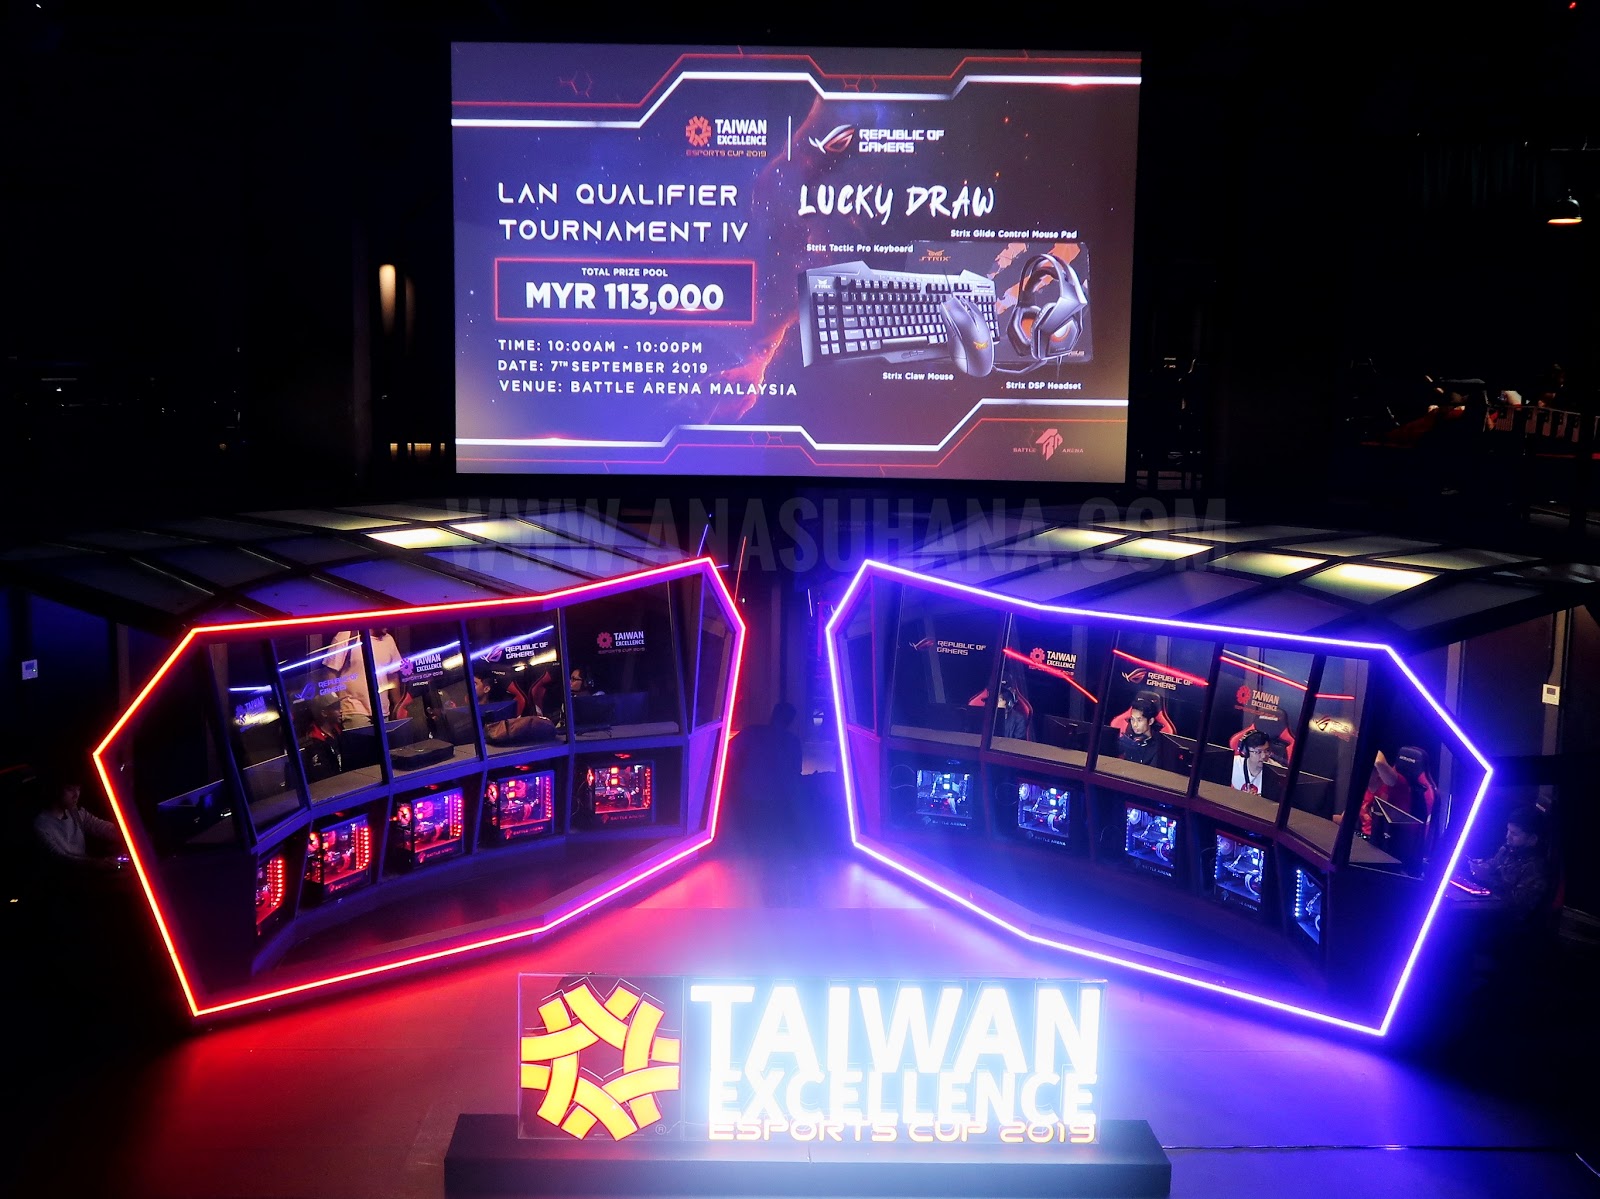 Taiwan Excellence Esports Cup 2019